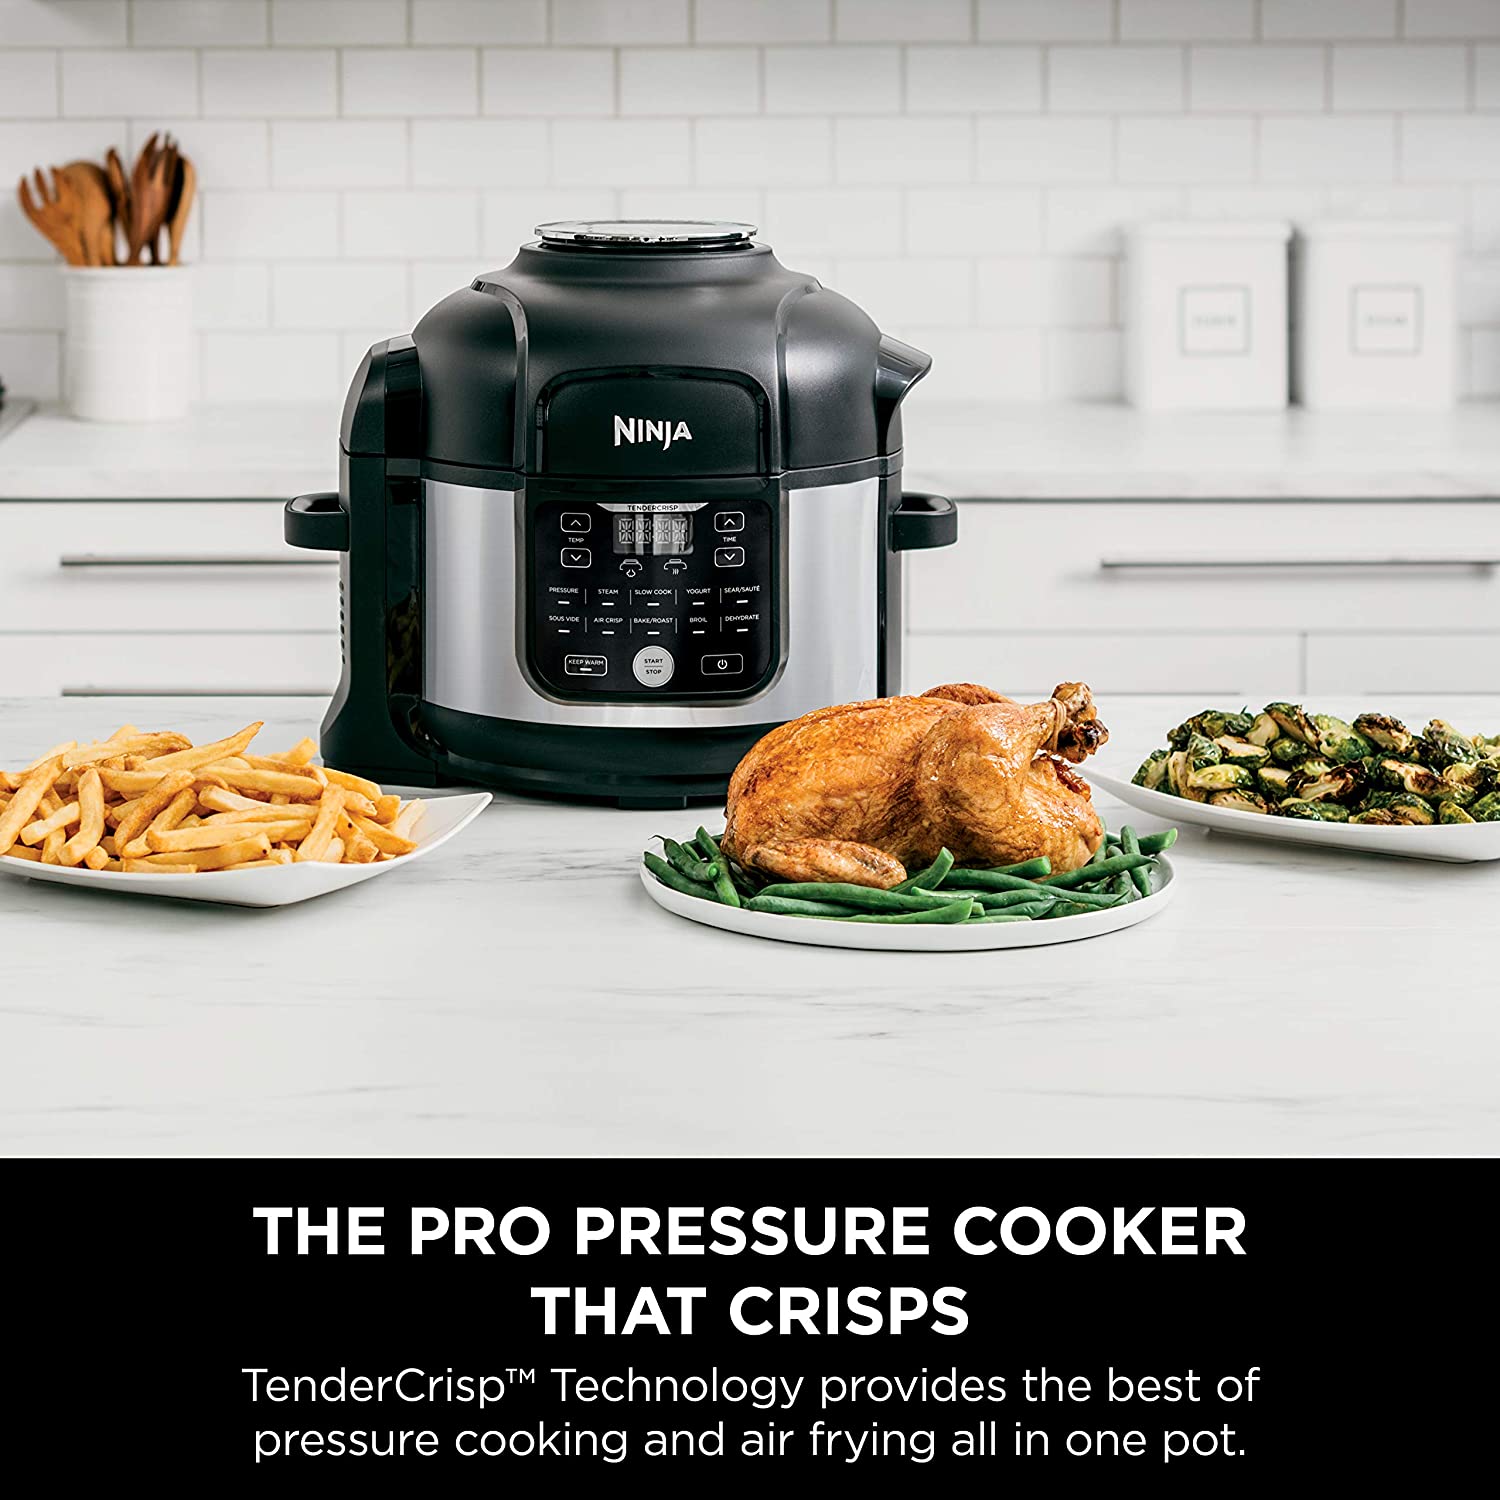 Ninja Foodi FD302 Pro Pressure Cooker [Review] - YourKitchenTime